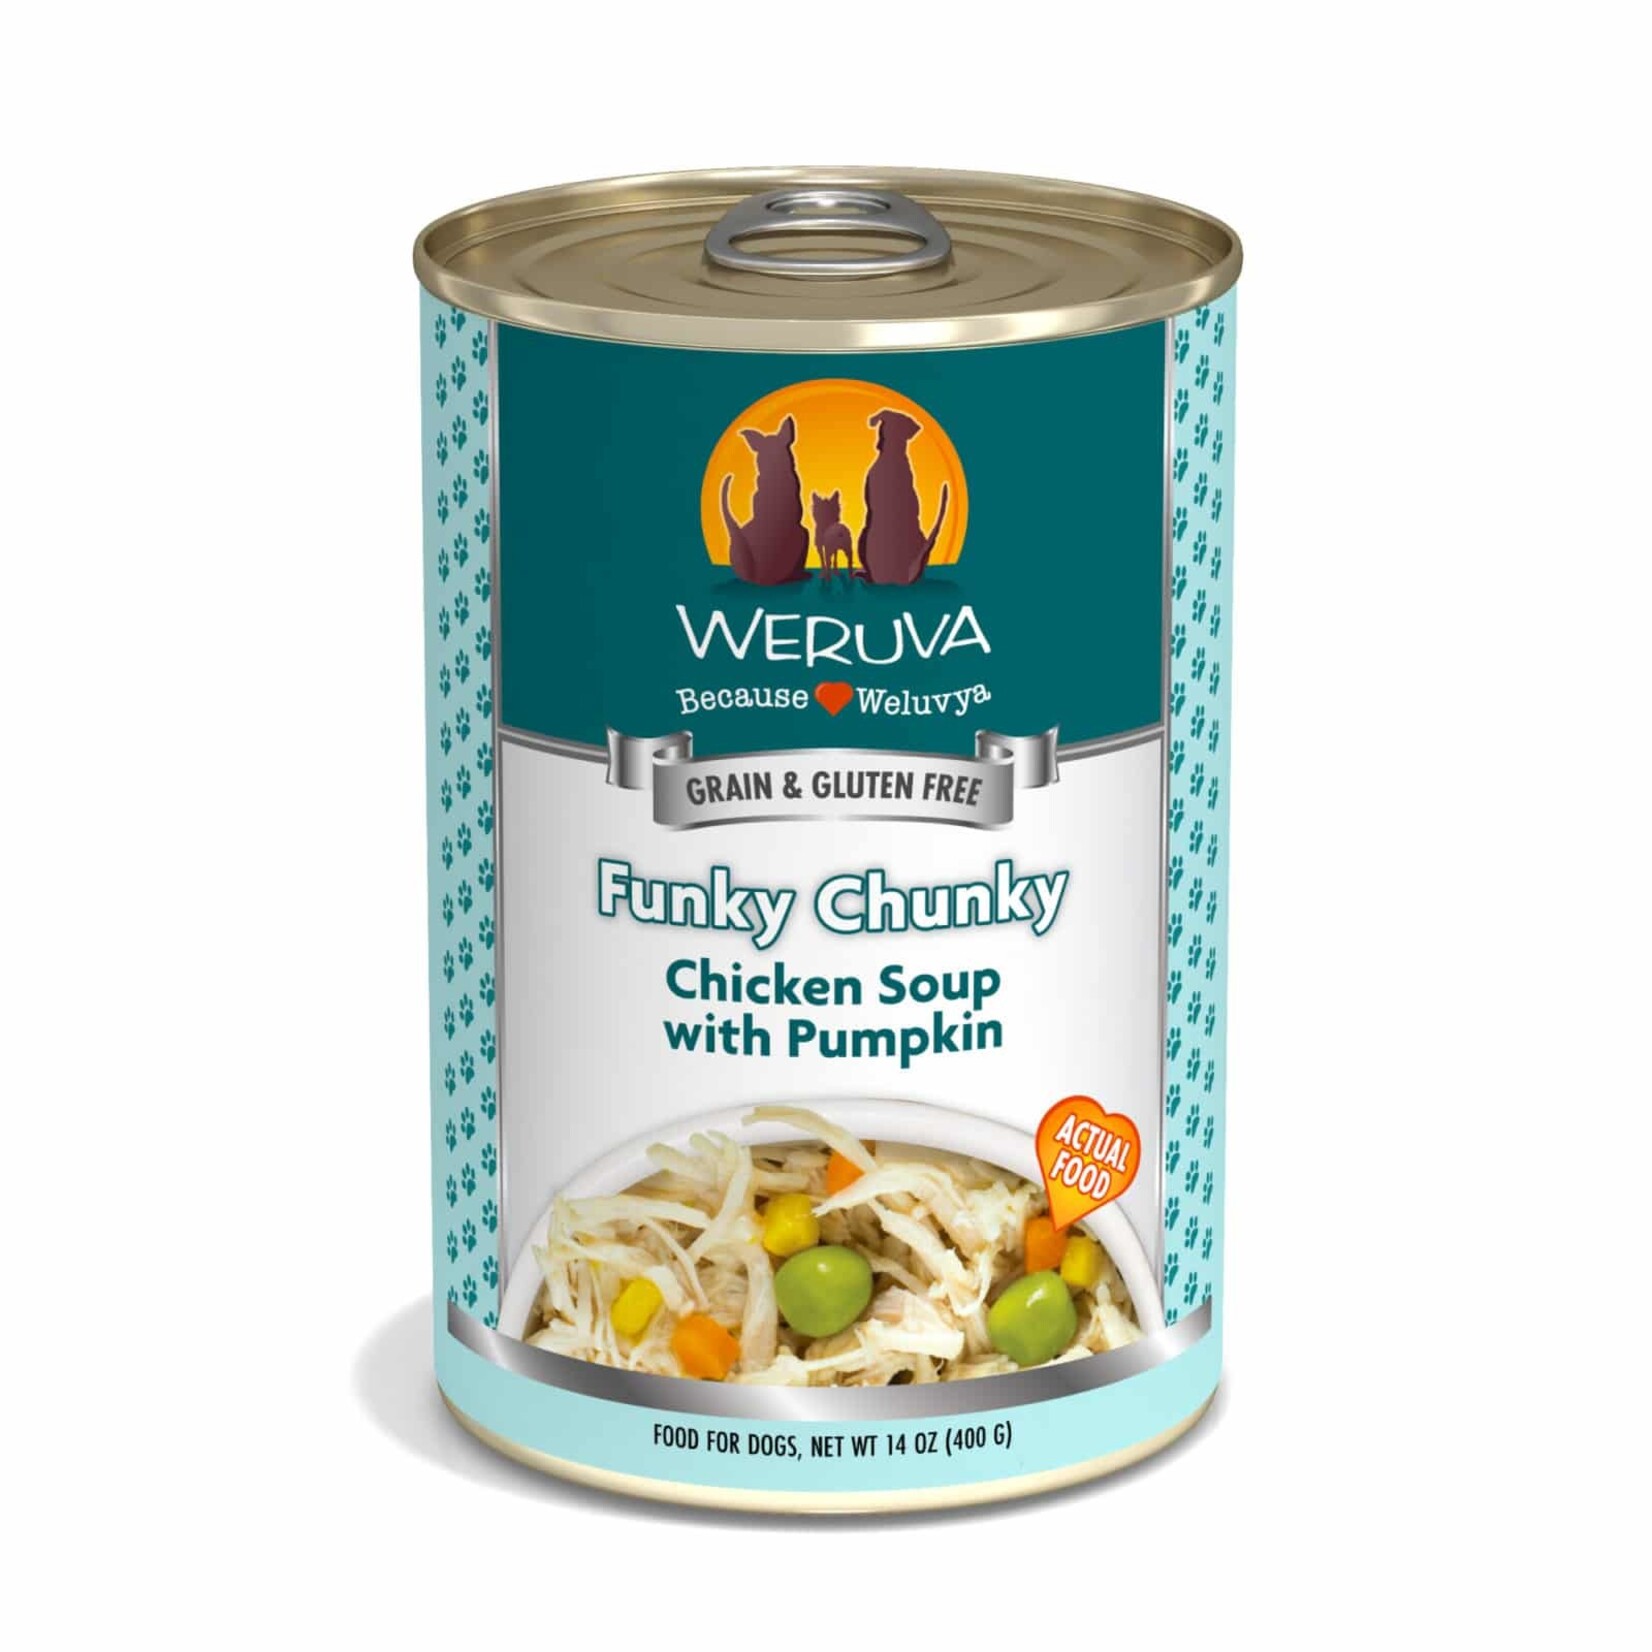 Weruva Funky Chunky Chicken Soup with Pumpkin Wet Dog Food